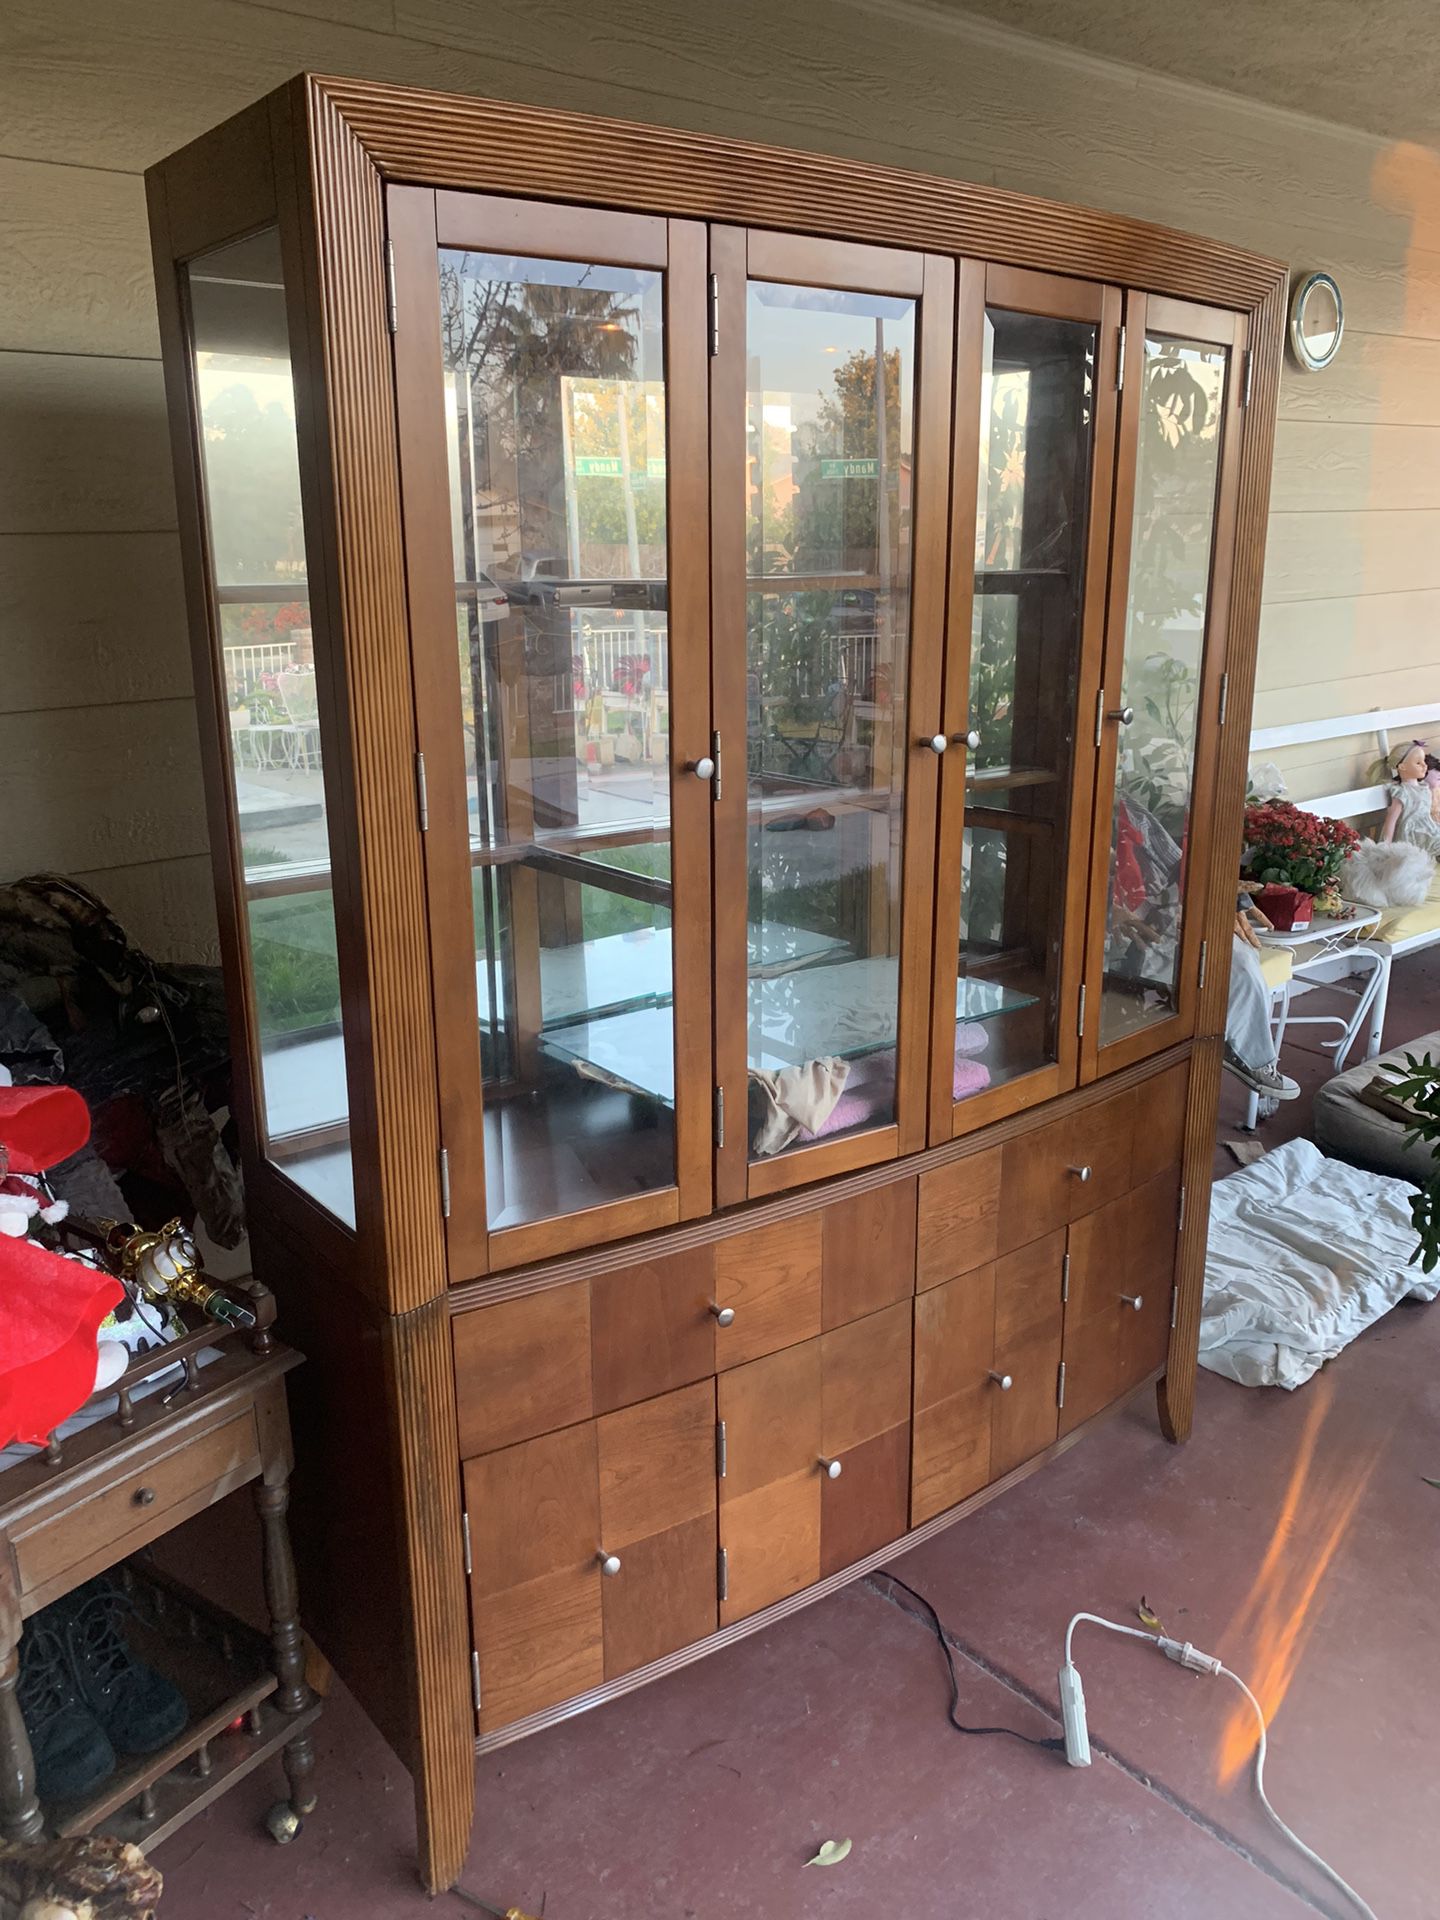 Big Brown Wooden China Cabinet with lights and mirror $250 Or Best Offer (o su mejor oferta. no tenga pena) . Make an offer pls don’t be shy I’m tryin